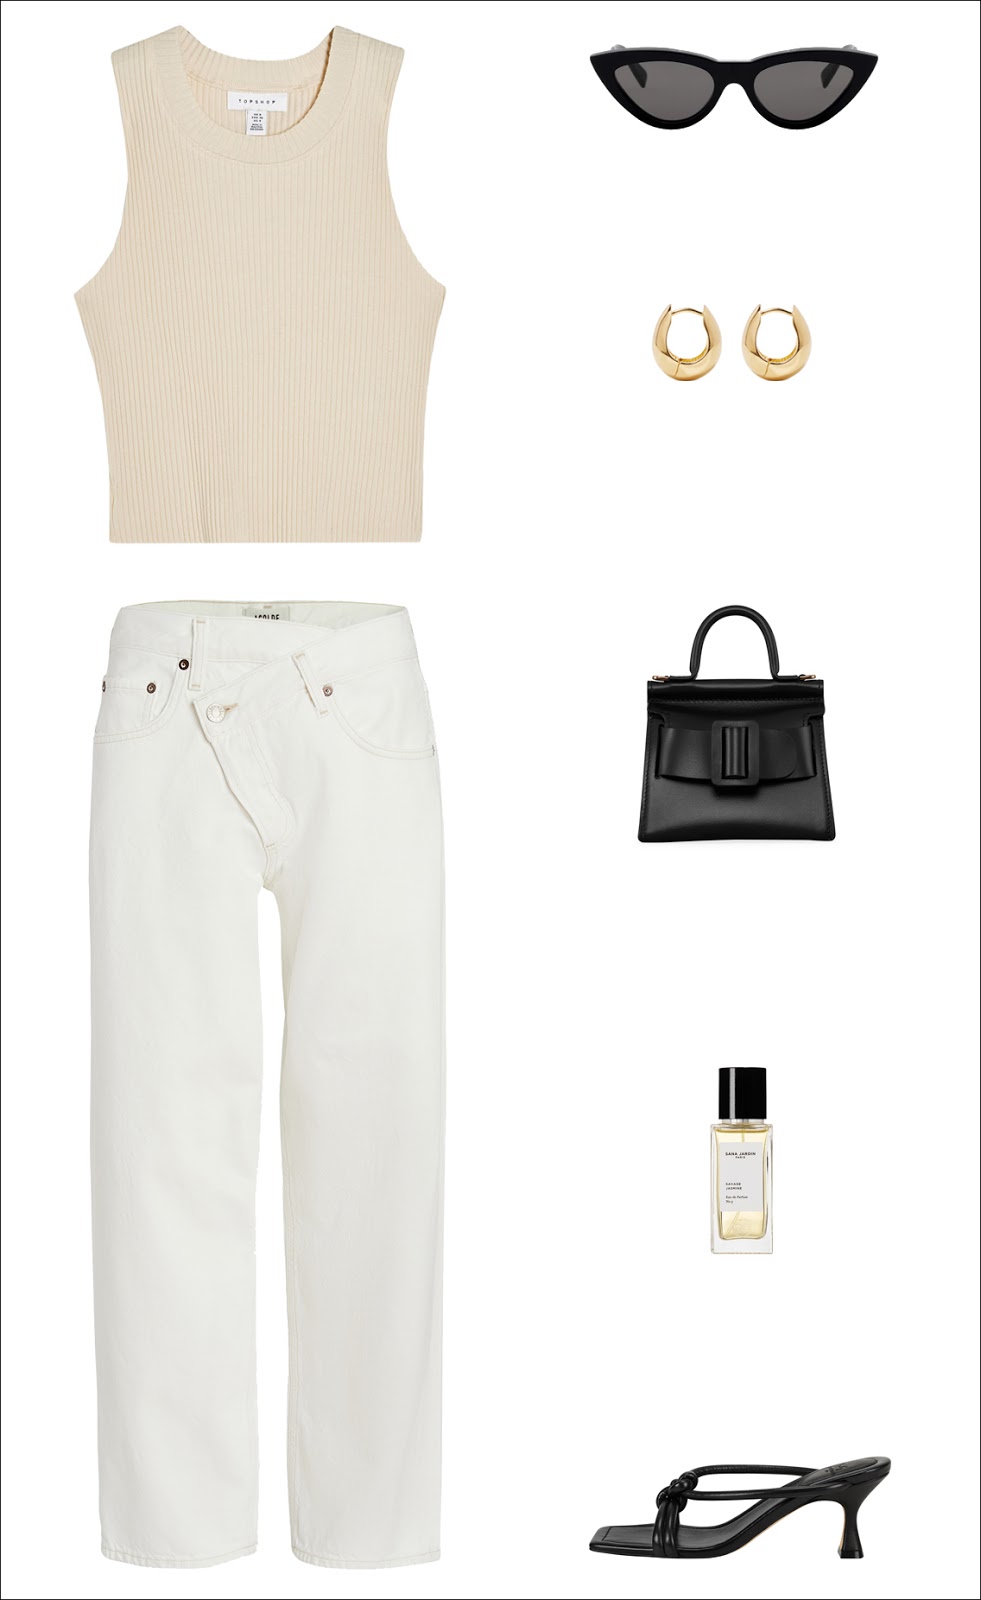 Stylish Way to Wear White Jeans for Summer — black cat-eye sunglasses, a beige tank top, yellow-gold hoop earrings, a cool black mini bag, white straight-leg jeans, and strappy black mule heels